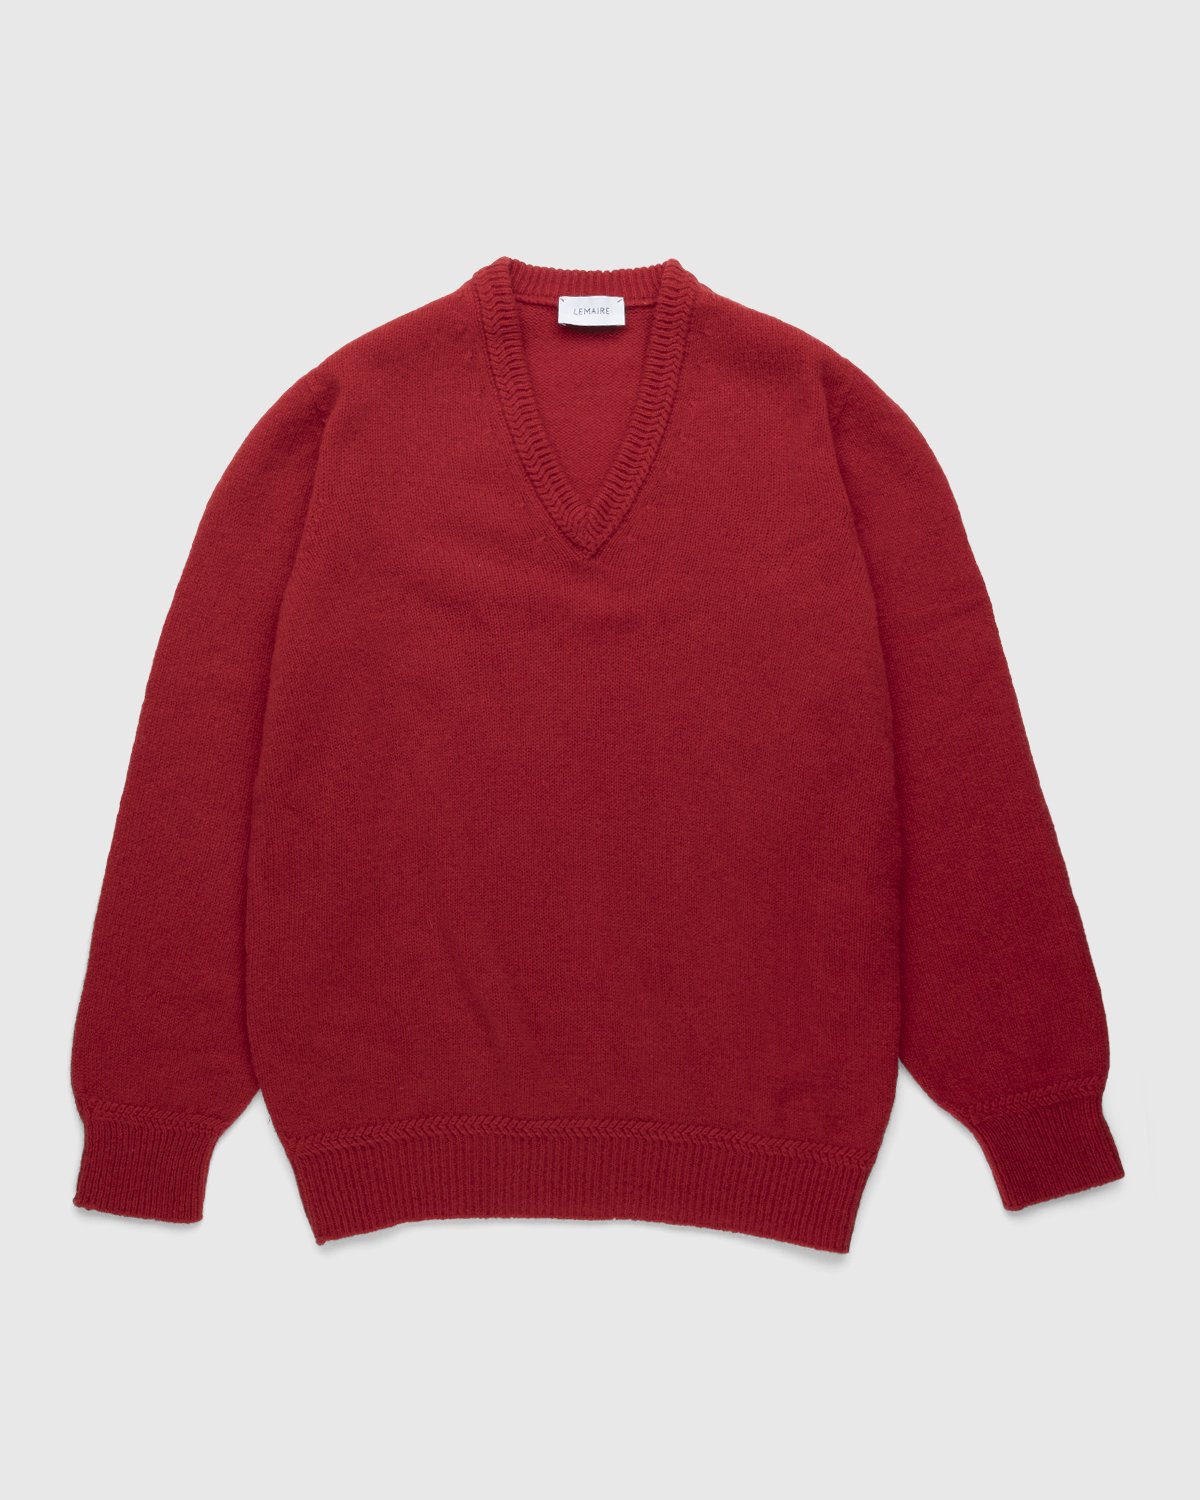 Lemaire - Seamless Shetland Wool V-Neck Sweater Poppy Red - Clothing - Red - Image 1